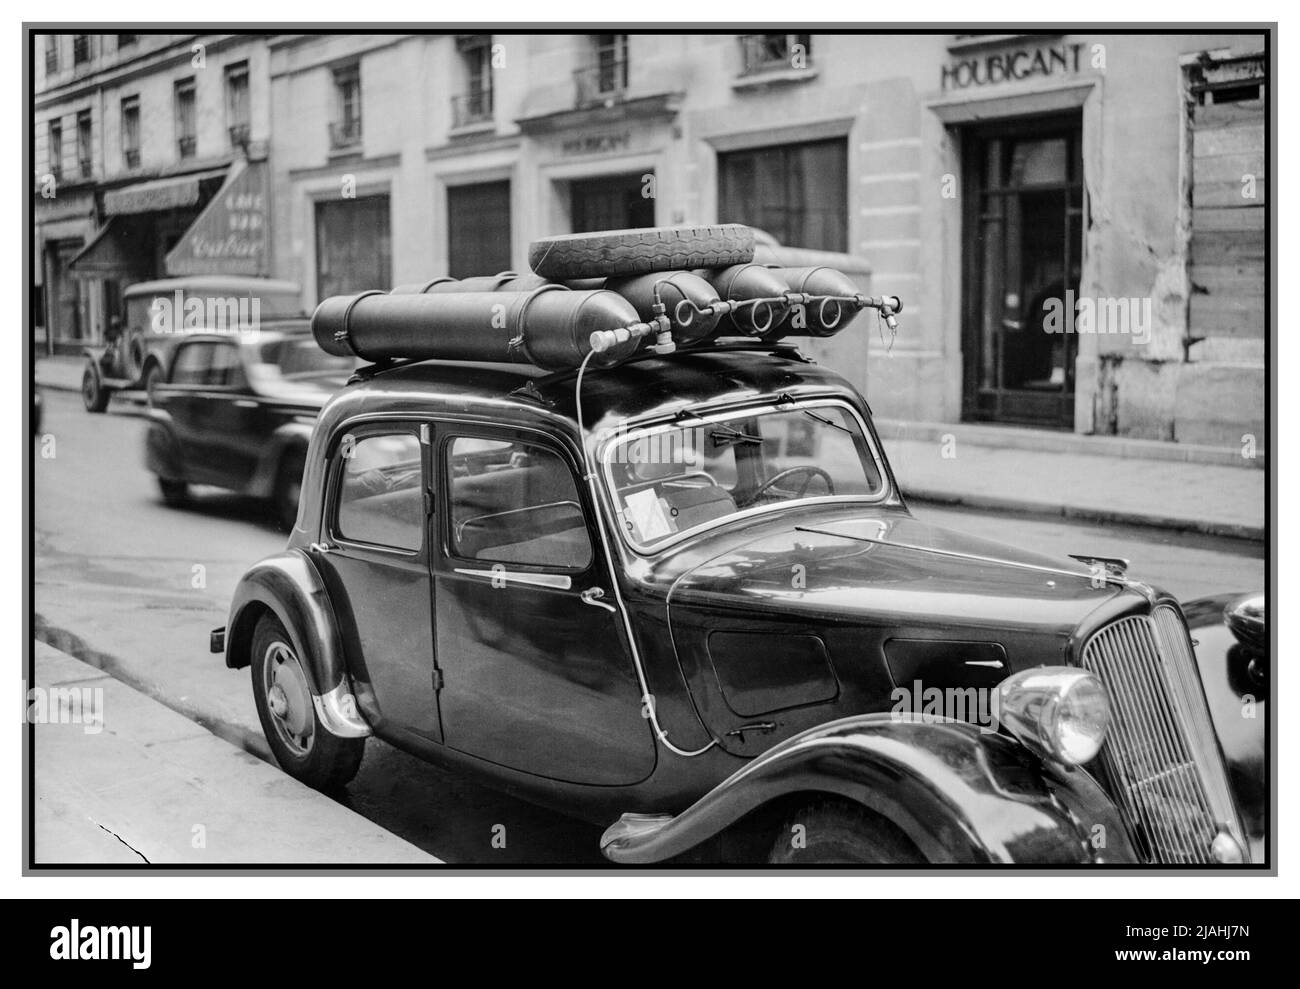 Post War WW2 Car Fuel Gas Bottle alternative.  Rationing France Parisian Traffic, Spring 1945- Everyday Life in post war Paris, France, 1945 A view of a Paris street, showing a car which has been converted to run on gas, rather than petrol which is strictly rationed.. There are four gas cylinders attached to the roof of the car, and a small tube runs downs the side of the car and under the bonnet. Date 1945 Stock Photo